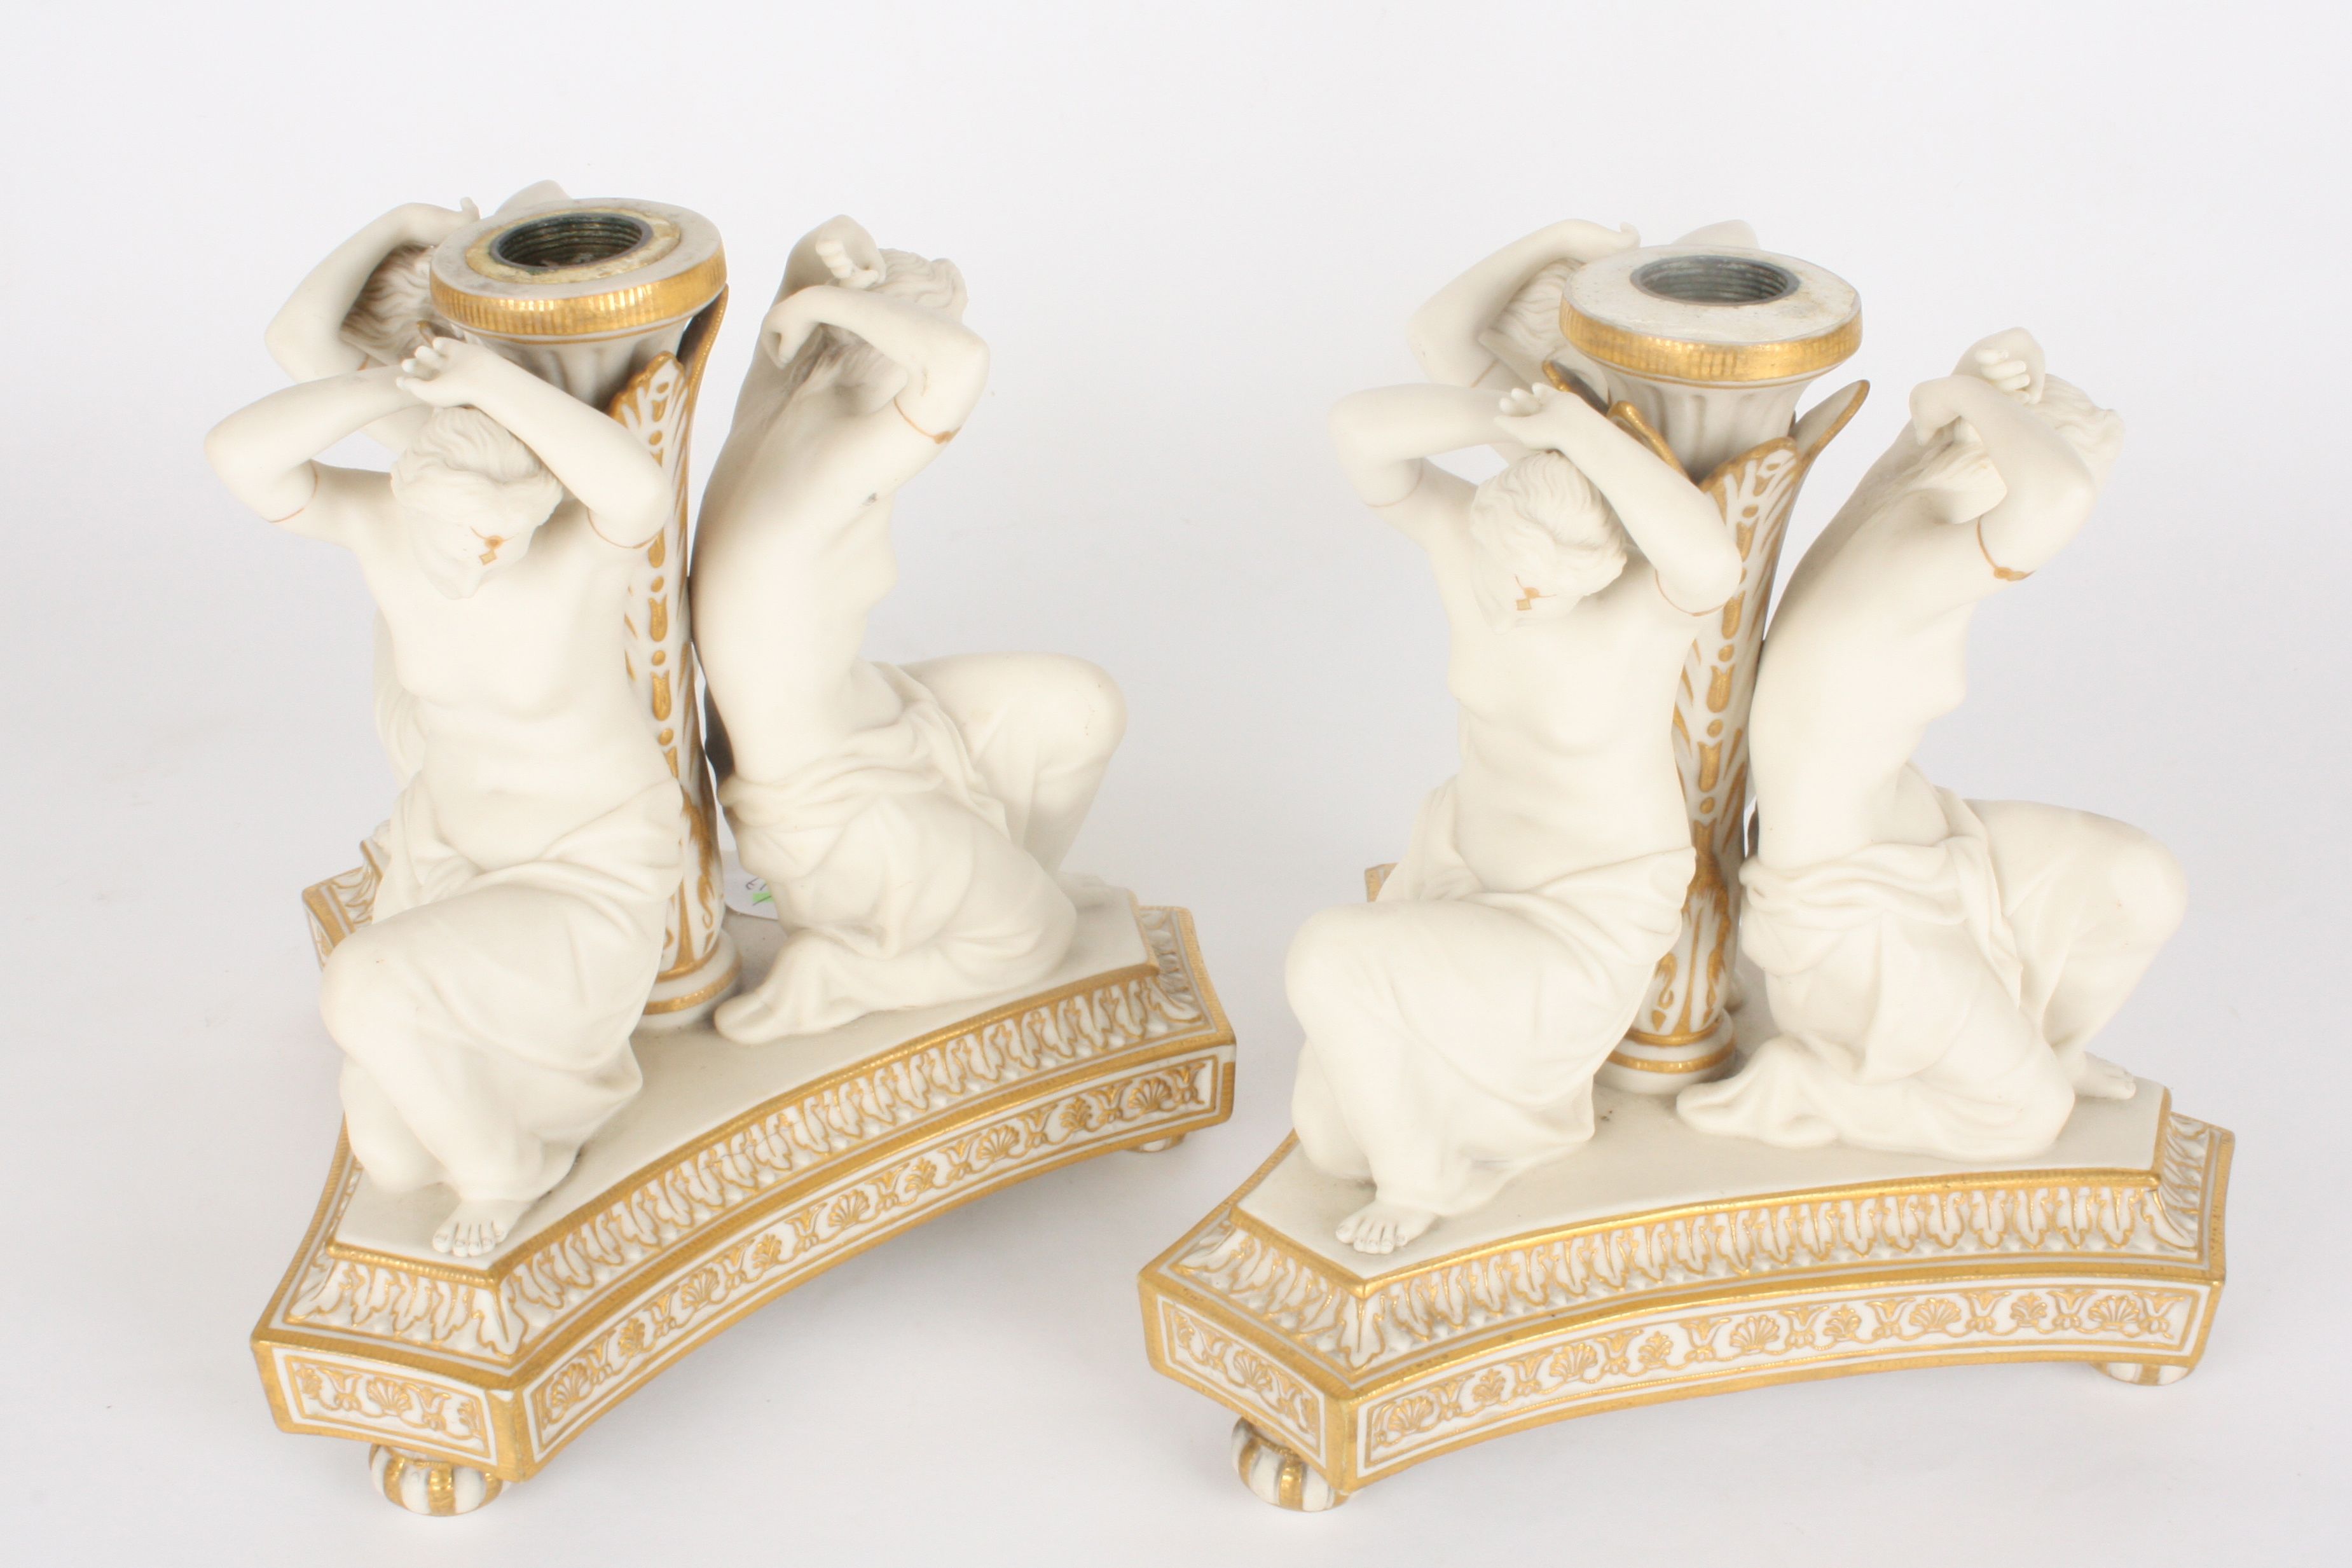 A pair of Victorian Copeland parian three graces candlesticks
formed as three kneeling semi-nudes